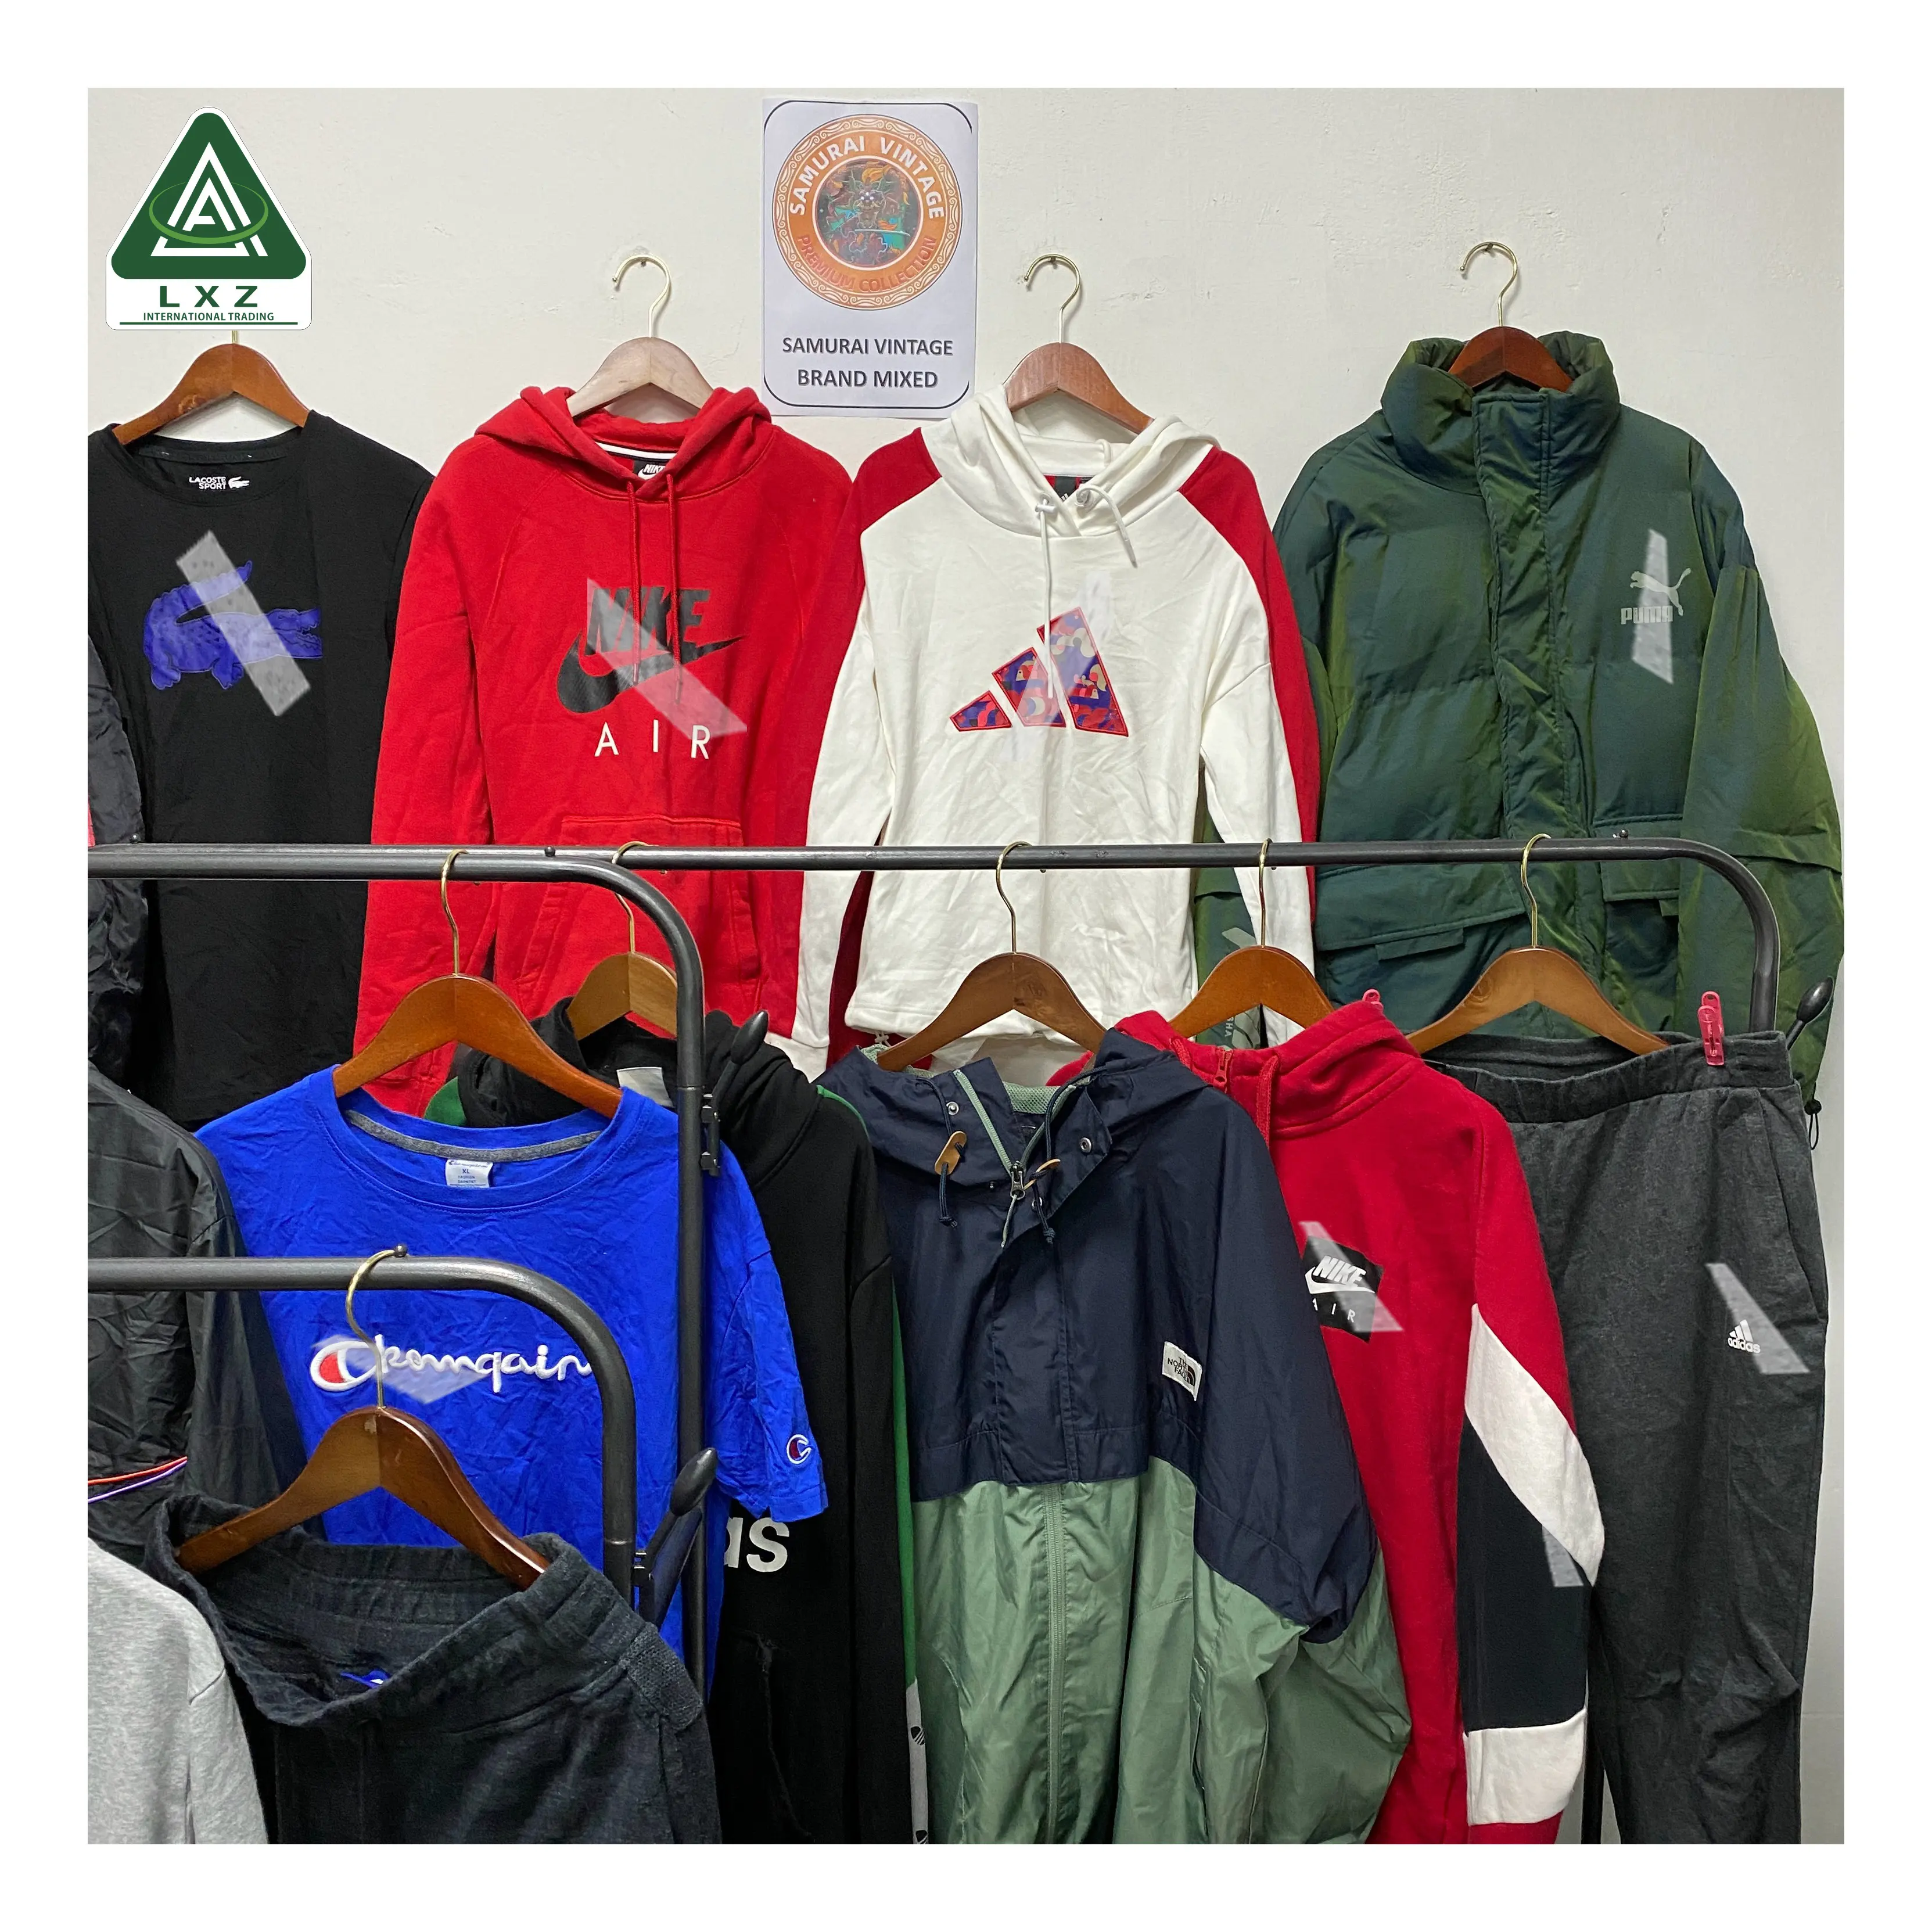 Used Clothing Brand Second Hand Clothes Branded Second Hand Clothing Brand